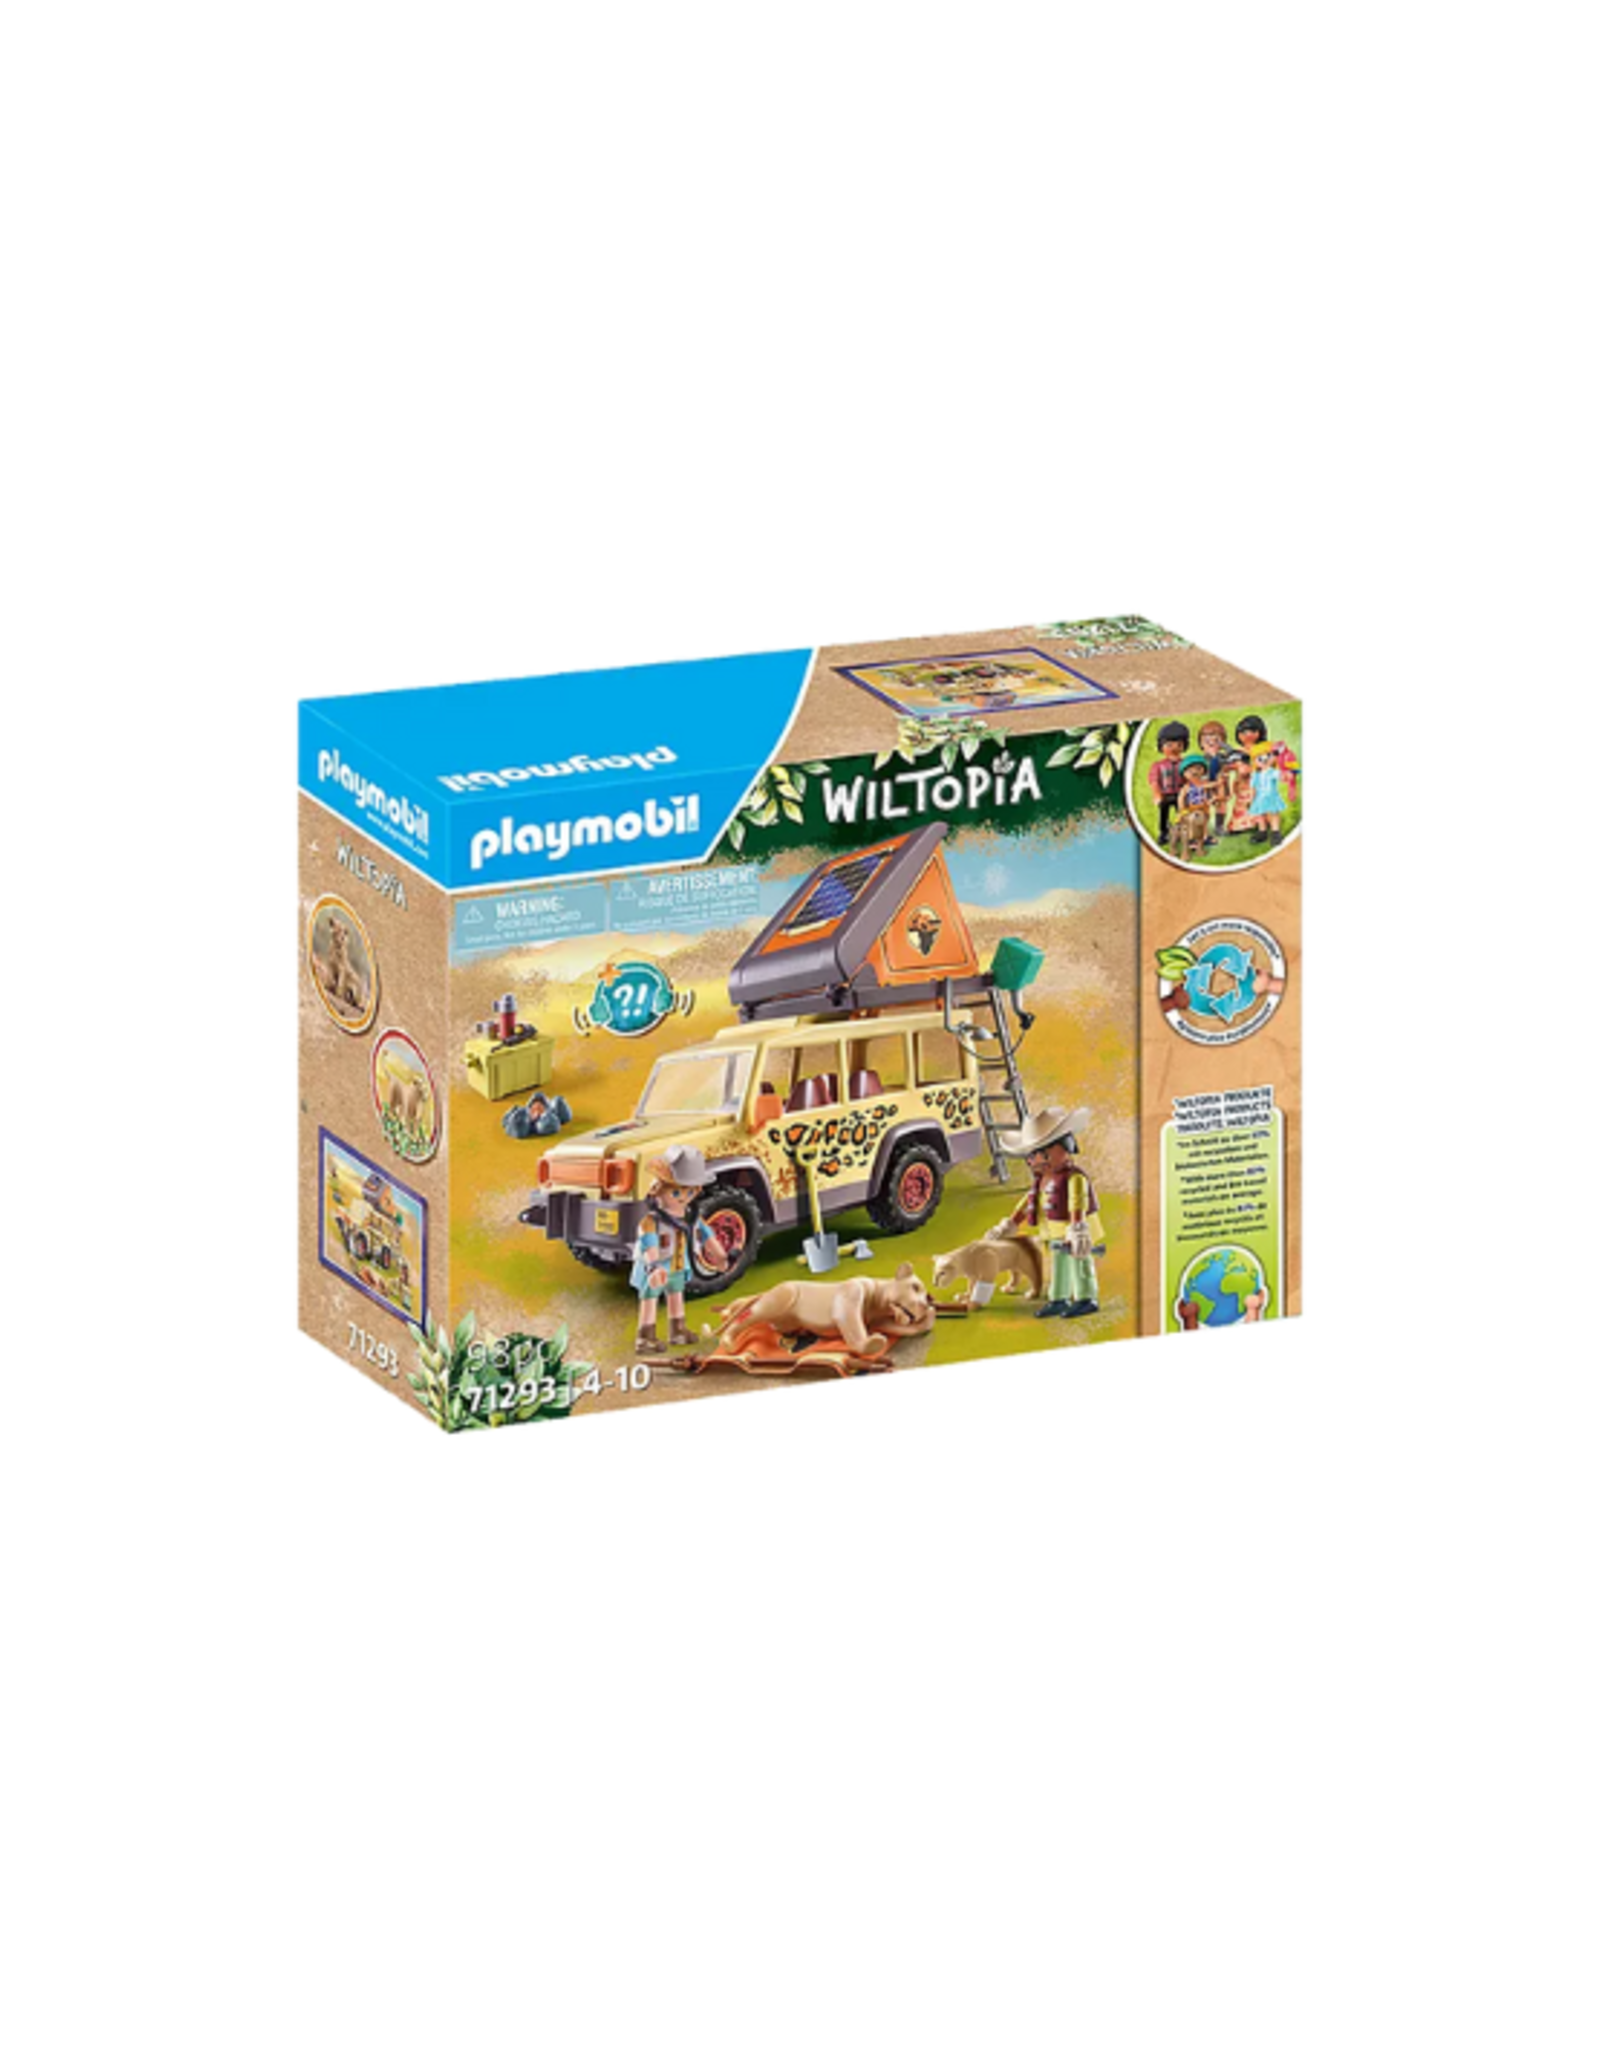 Playmobil Playmobil - Wiltopia - 71293 - Cross-Country Vehicle with Lions